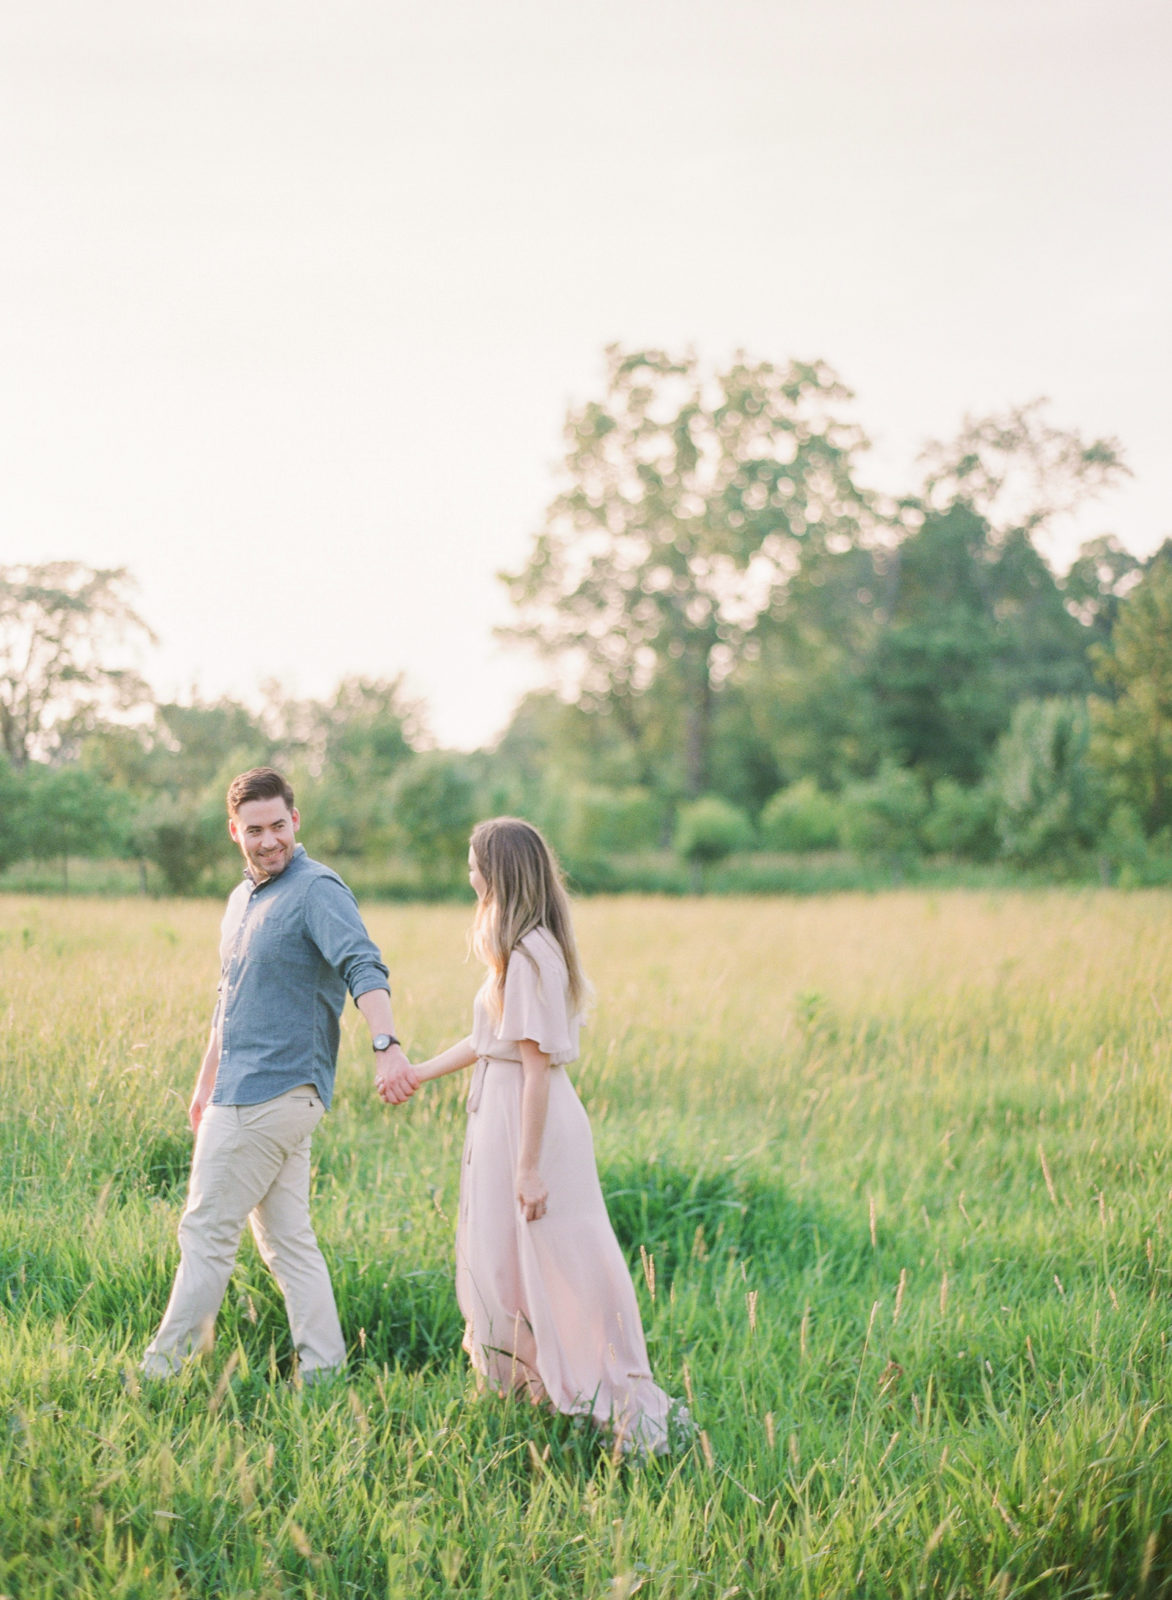 Best Engagement Photos of 2018 | Fine Art Film Photography | Destination Wedding Photographer | Molly Carr Photography | Engagement Session | Pre-Wedding Photos | Summer Engagement Session in a Field